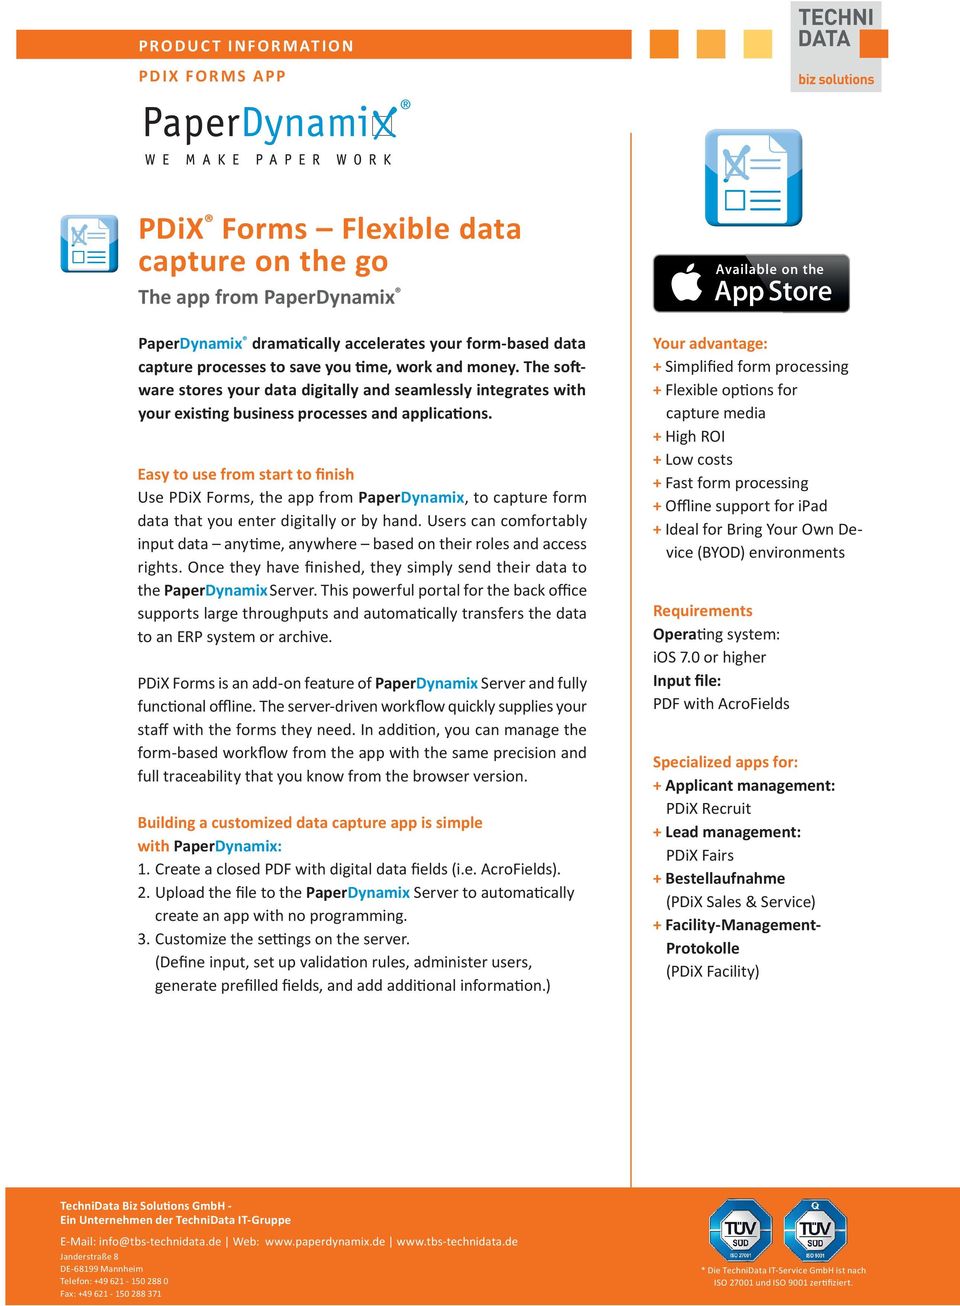 Easy to use from start to finish Use PDiX Forms, the app from PaperDynamix, to capture form data that you enter digitally or by hand.